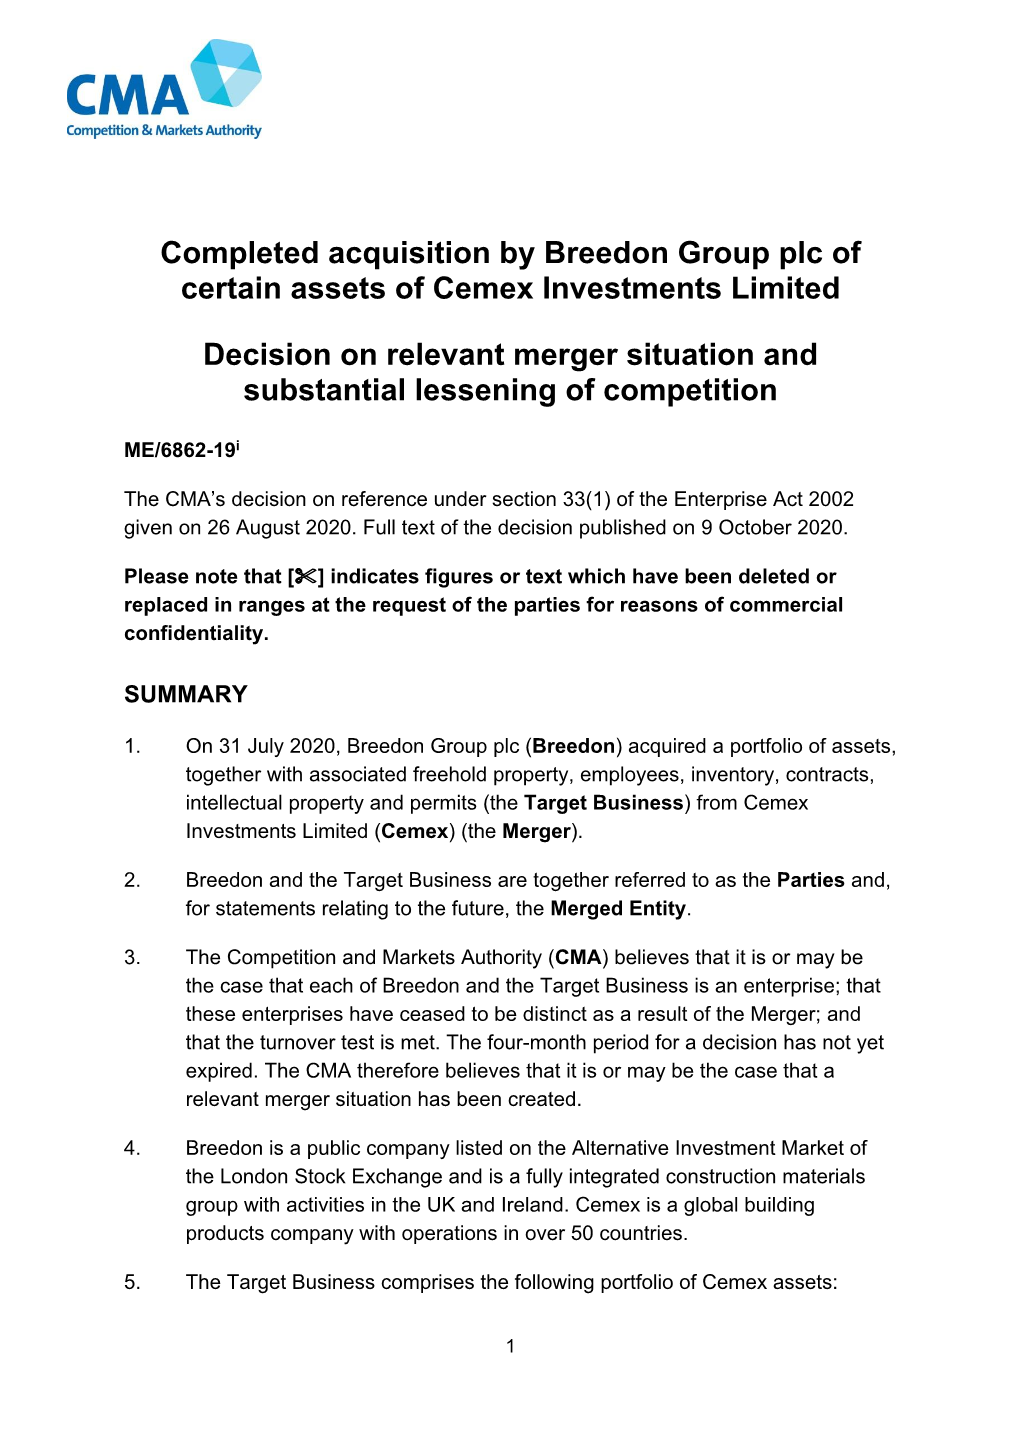 Breedon Group Plc/Cemex Investments Limited